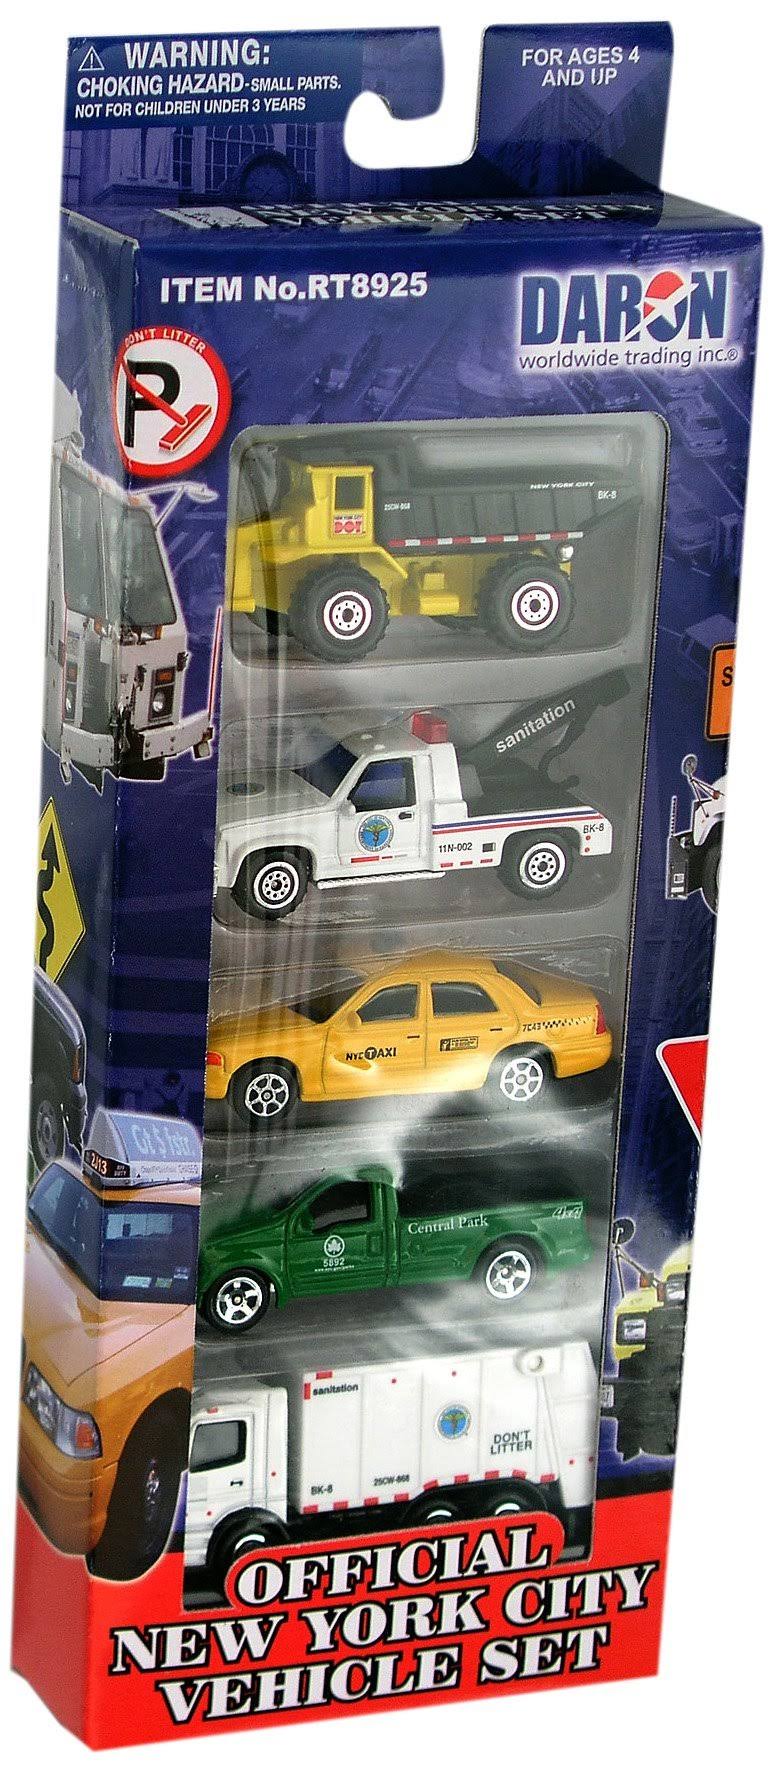 Daron New York City Official 5 PC Vehicle Set